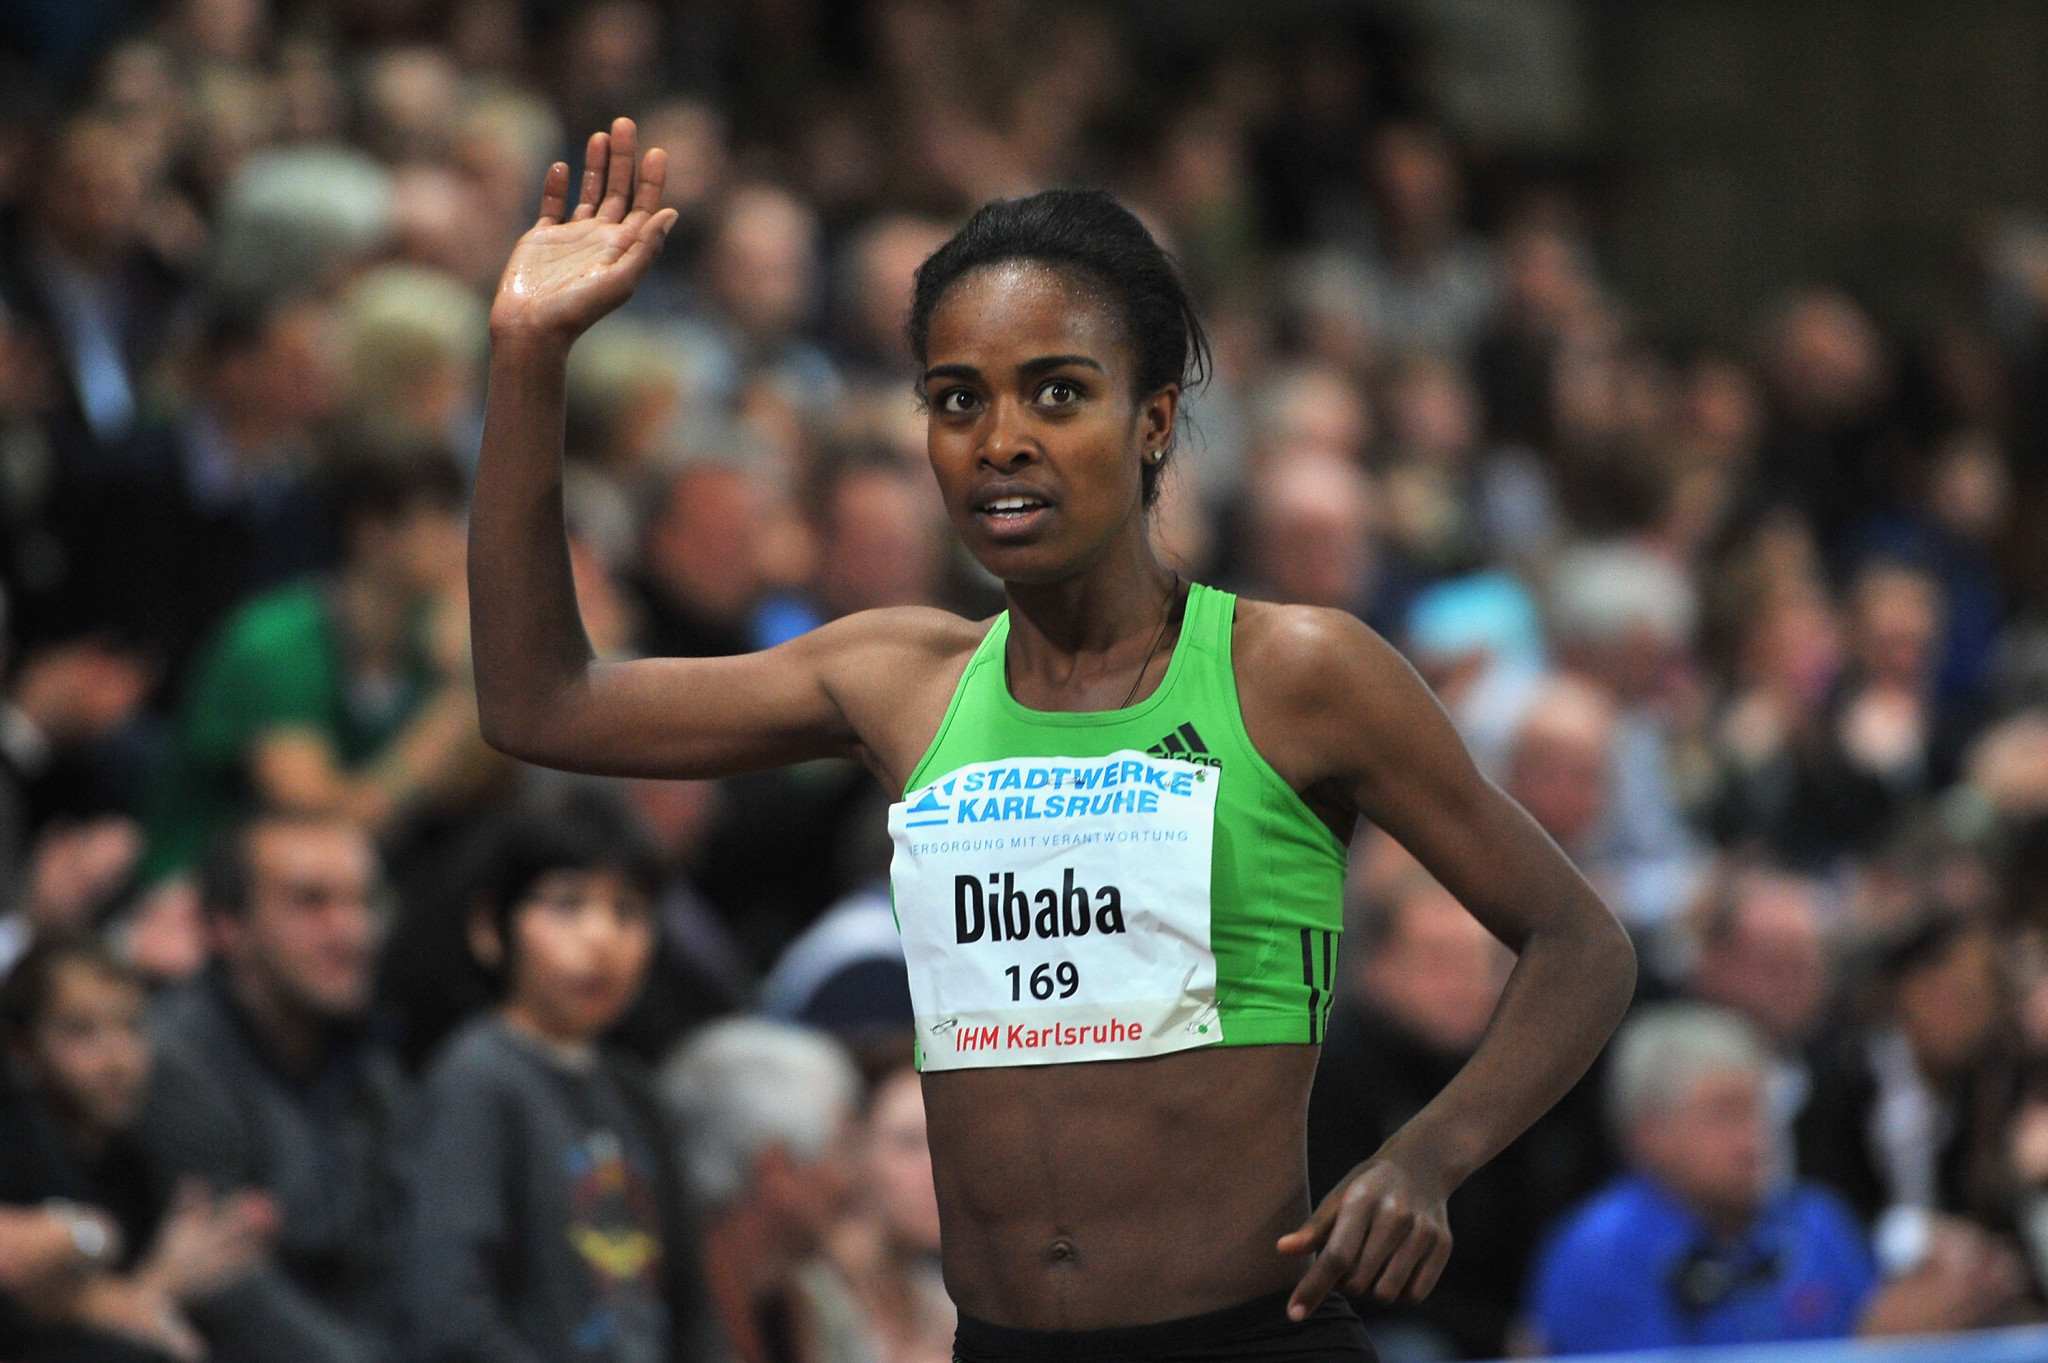 Genzebe Dibaba broke the world record in Karlsruhe in 2014 ©Getty Images